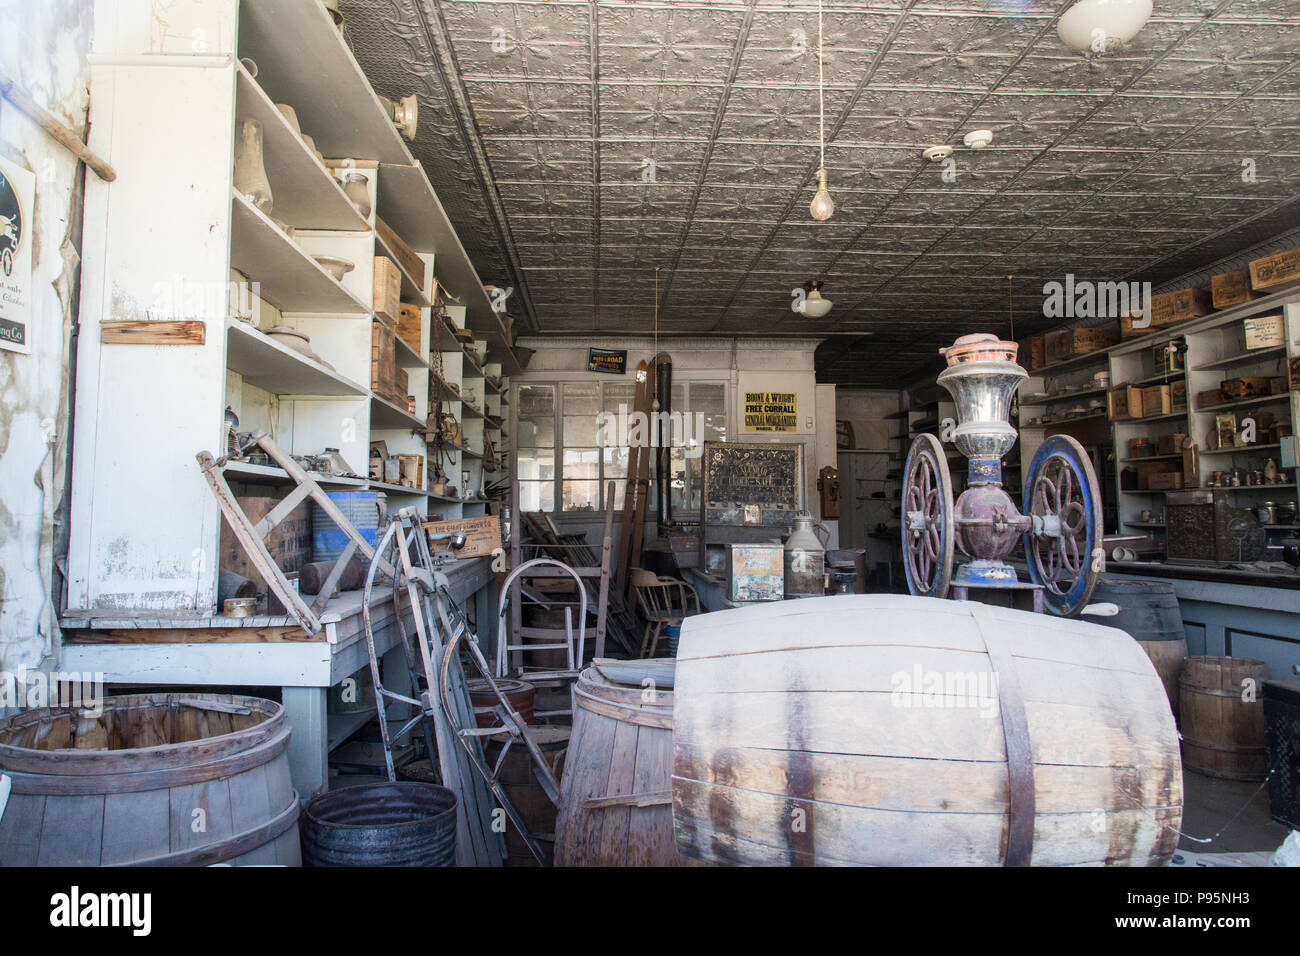 The Interior Of An Old General Store In The Old West Town Of